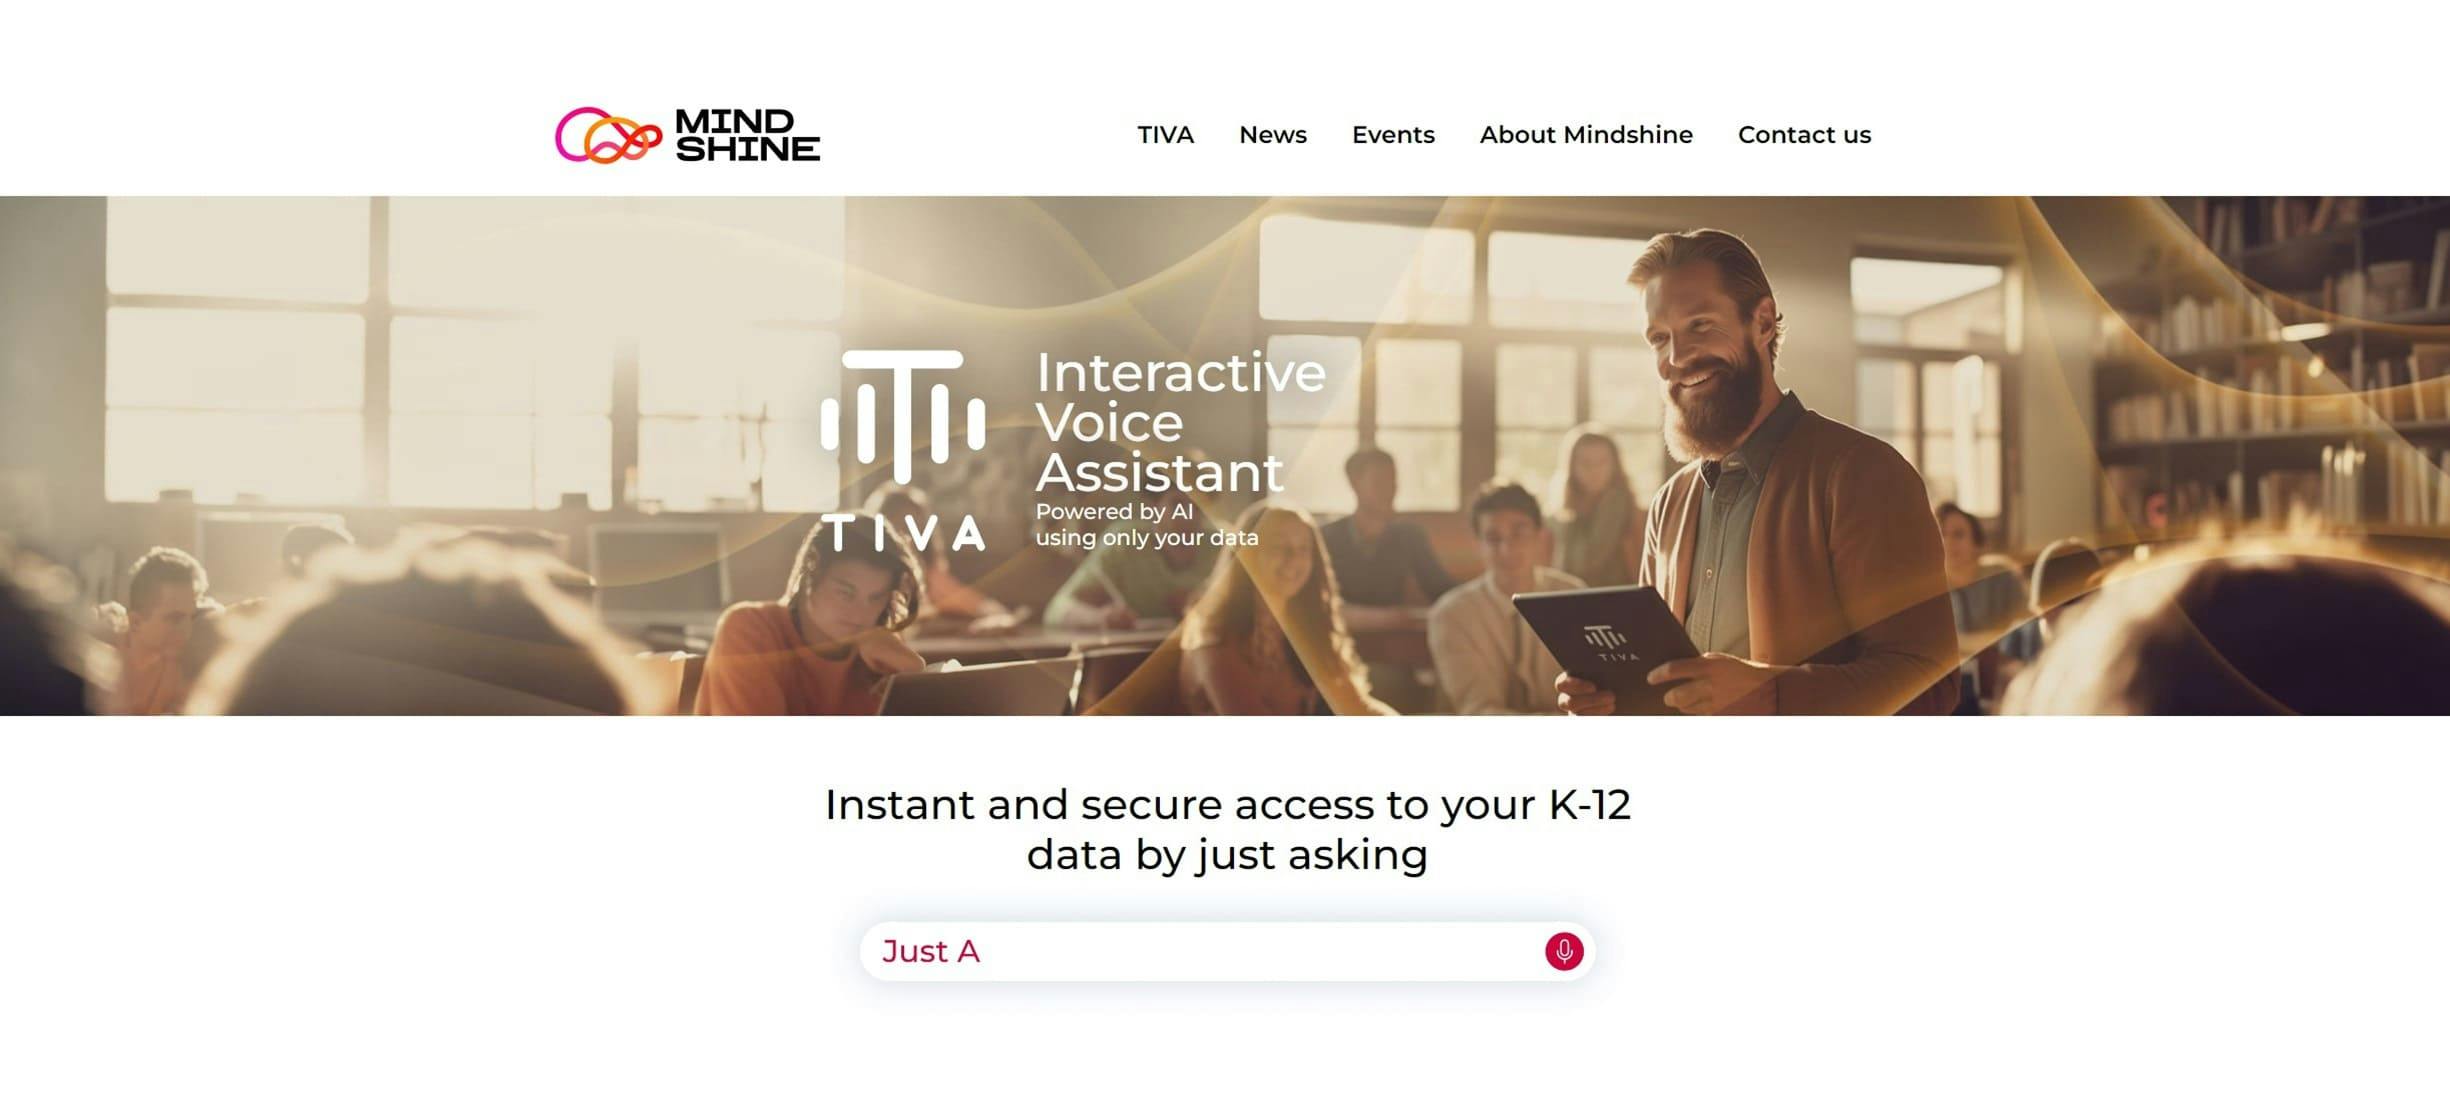 TIVA | Quick voice access to your data